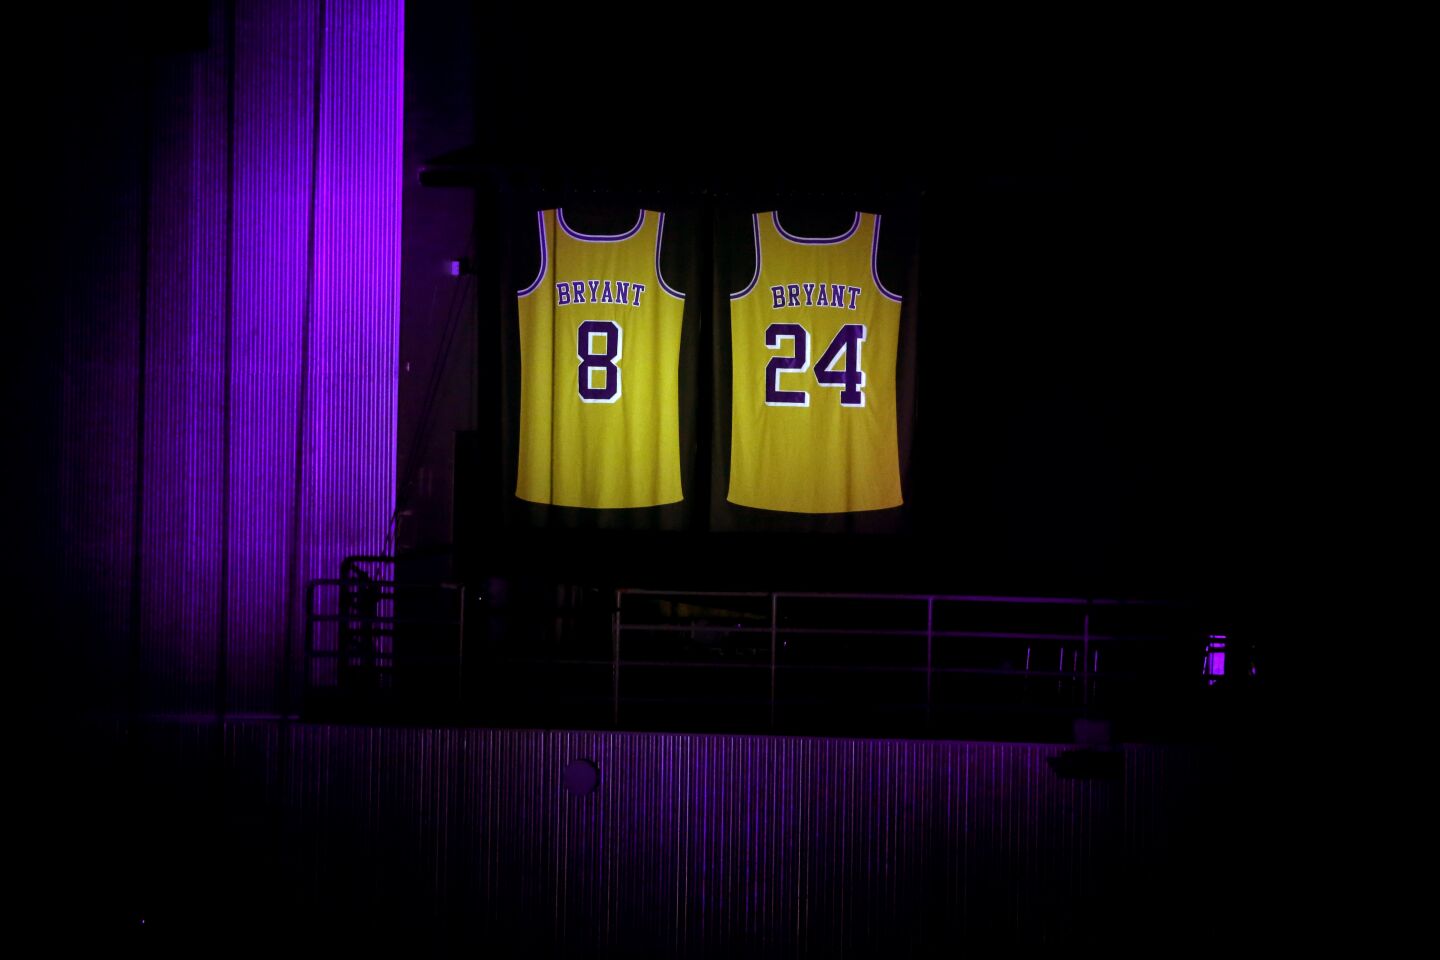 Koby Bryant's jerseys hang at Staples Center before a game between the Lakers and the Trail Blazers on Jan. 31.